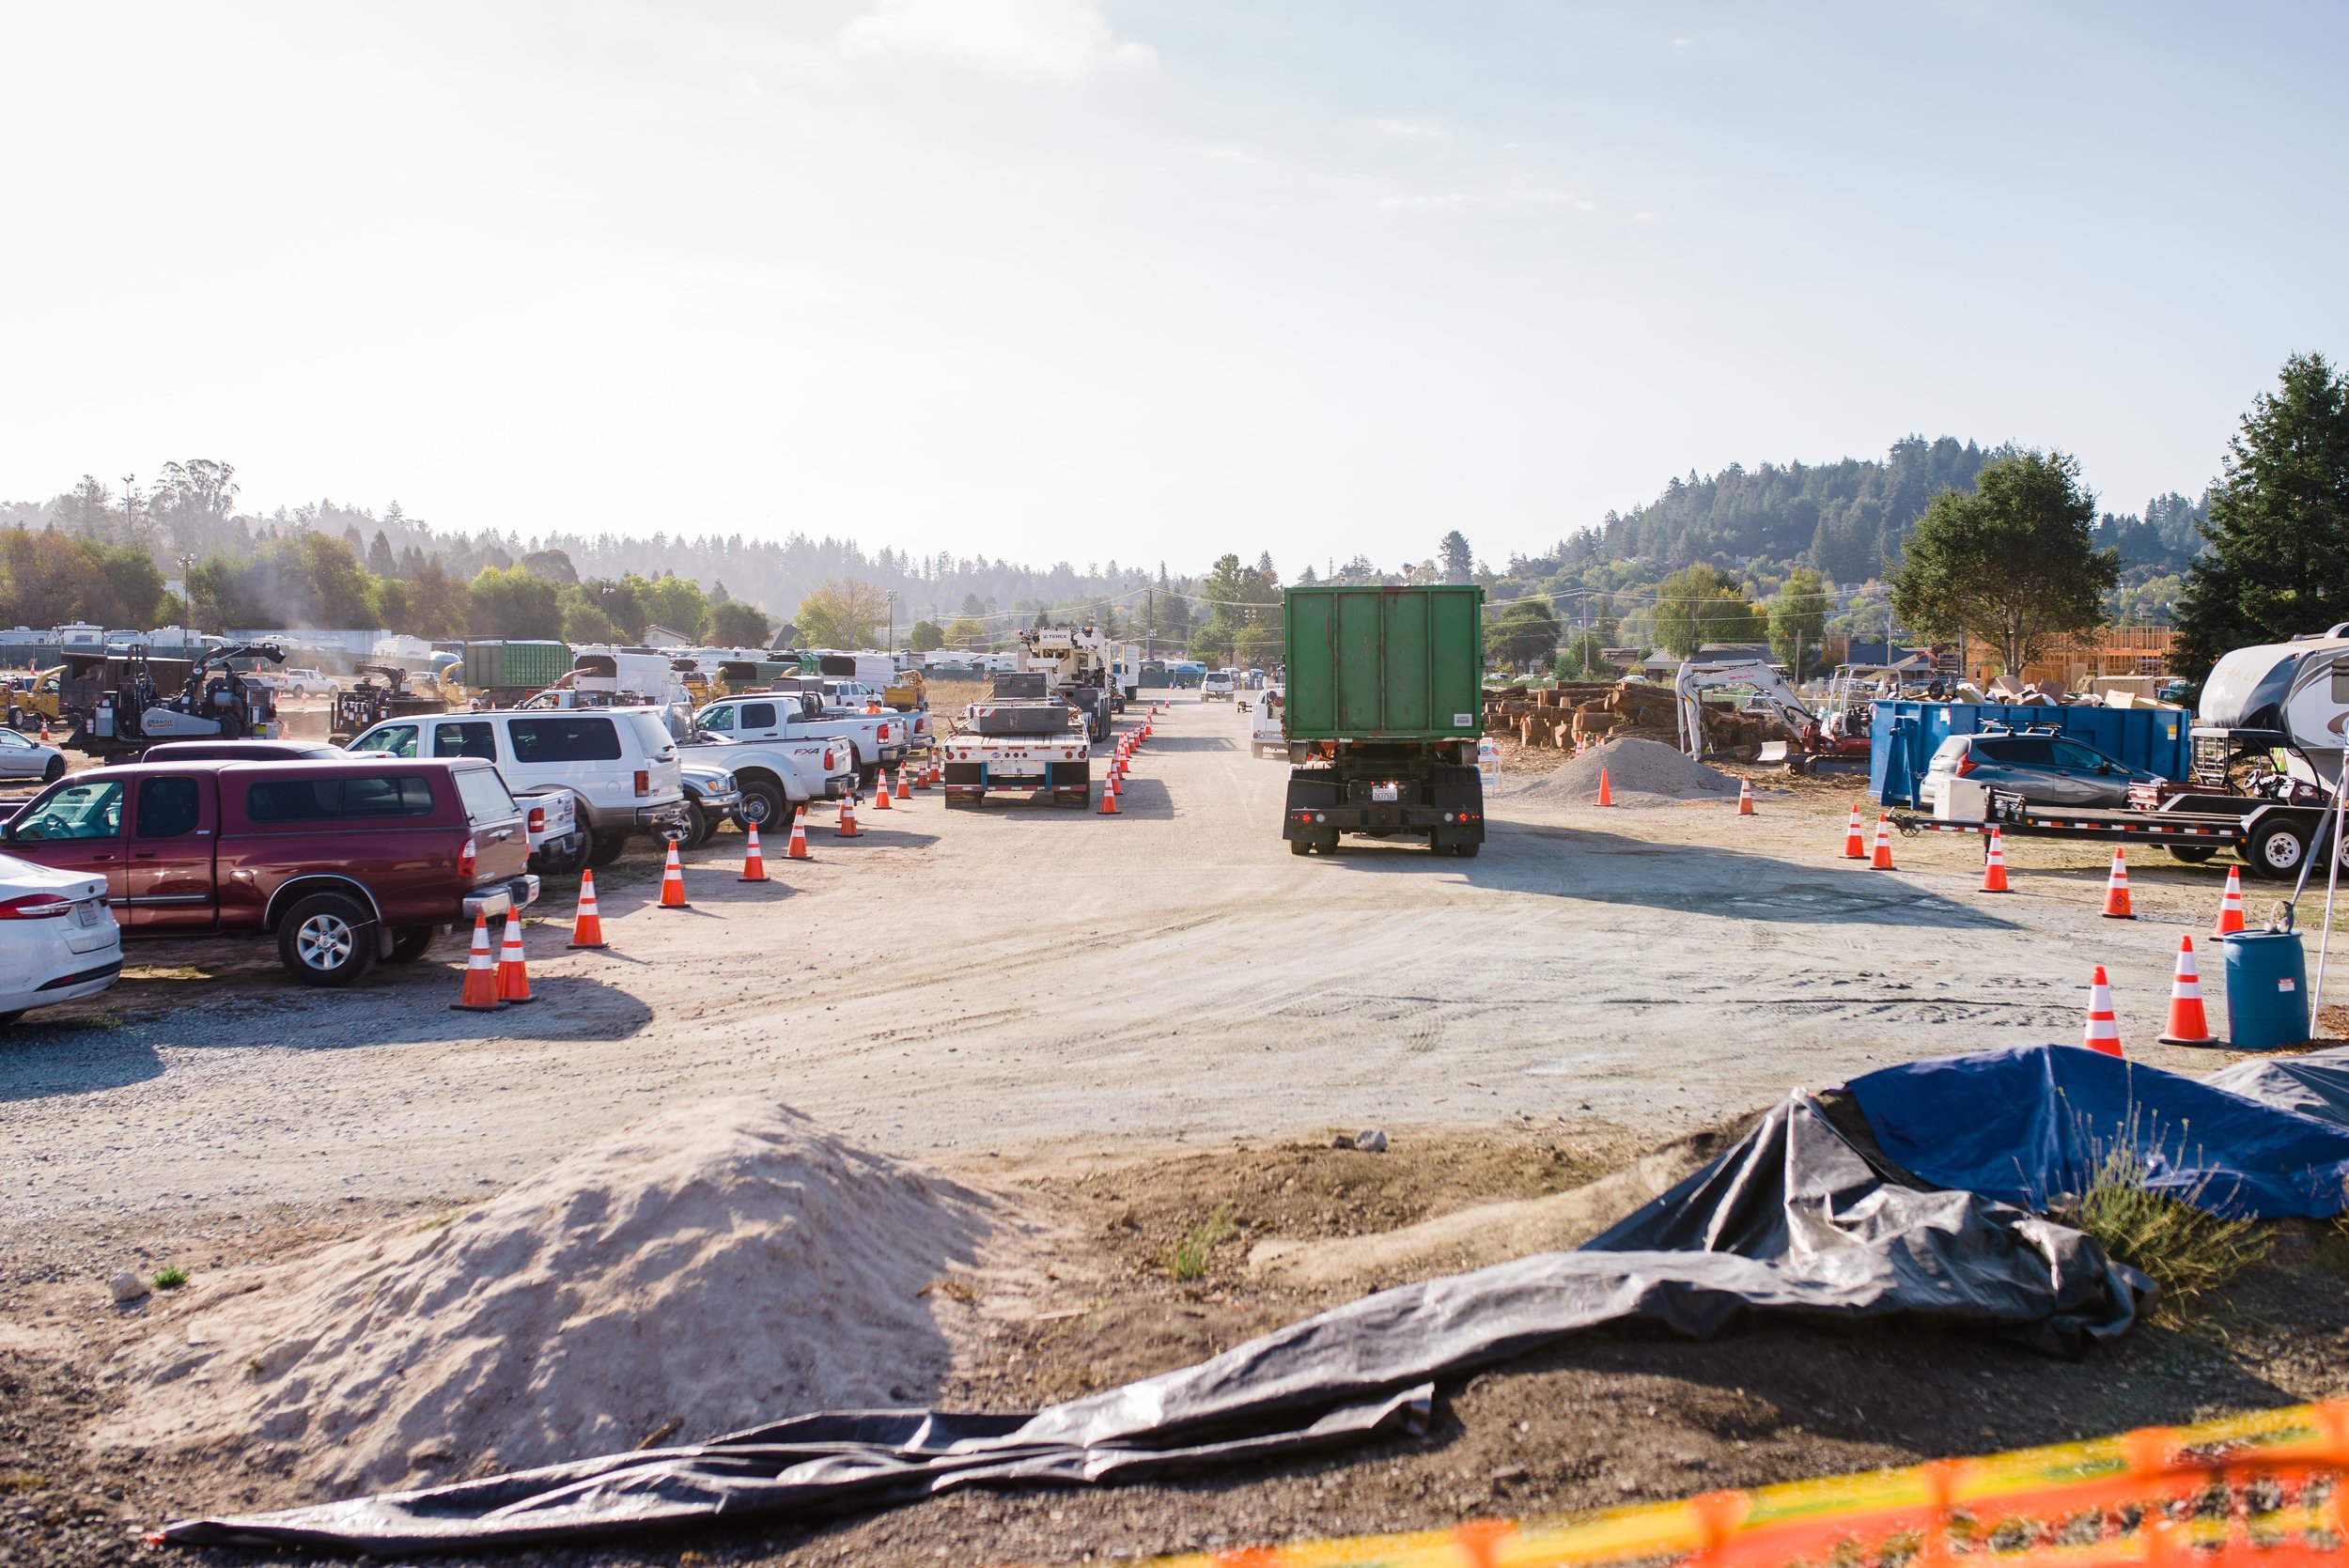  Views of the PG&amp;E basecamp, Scotts Valley, CA October 2018. 